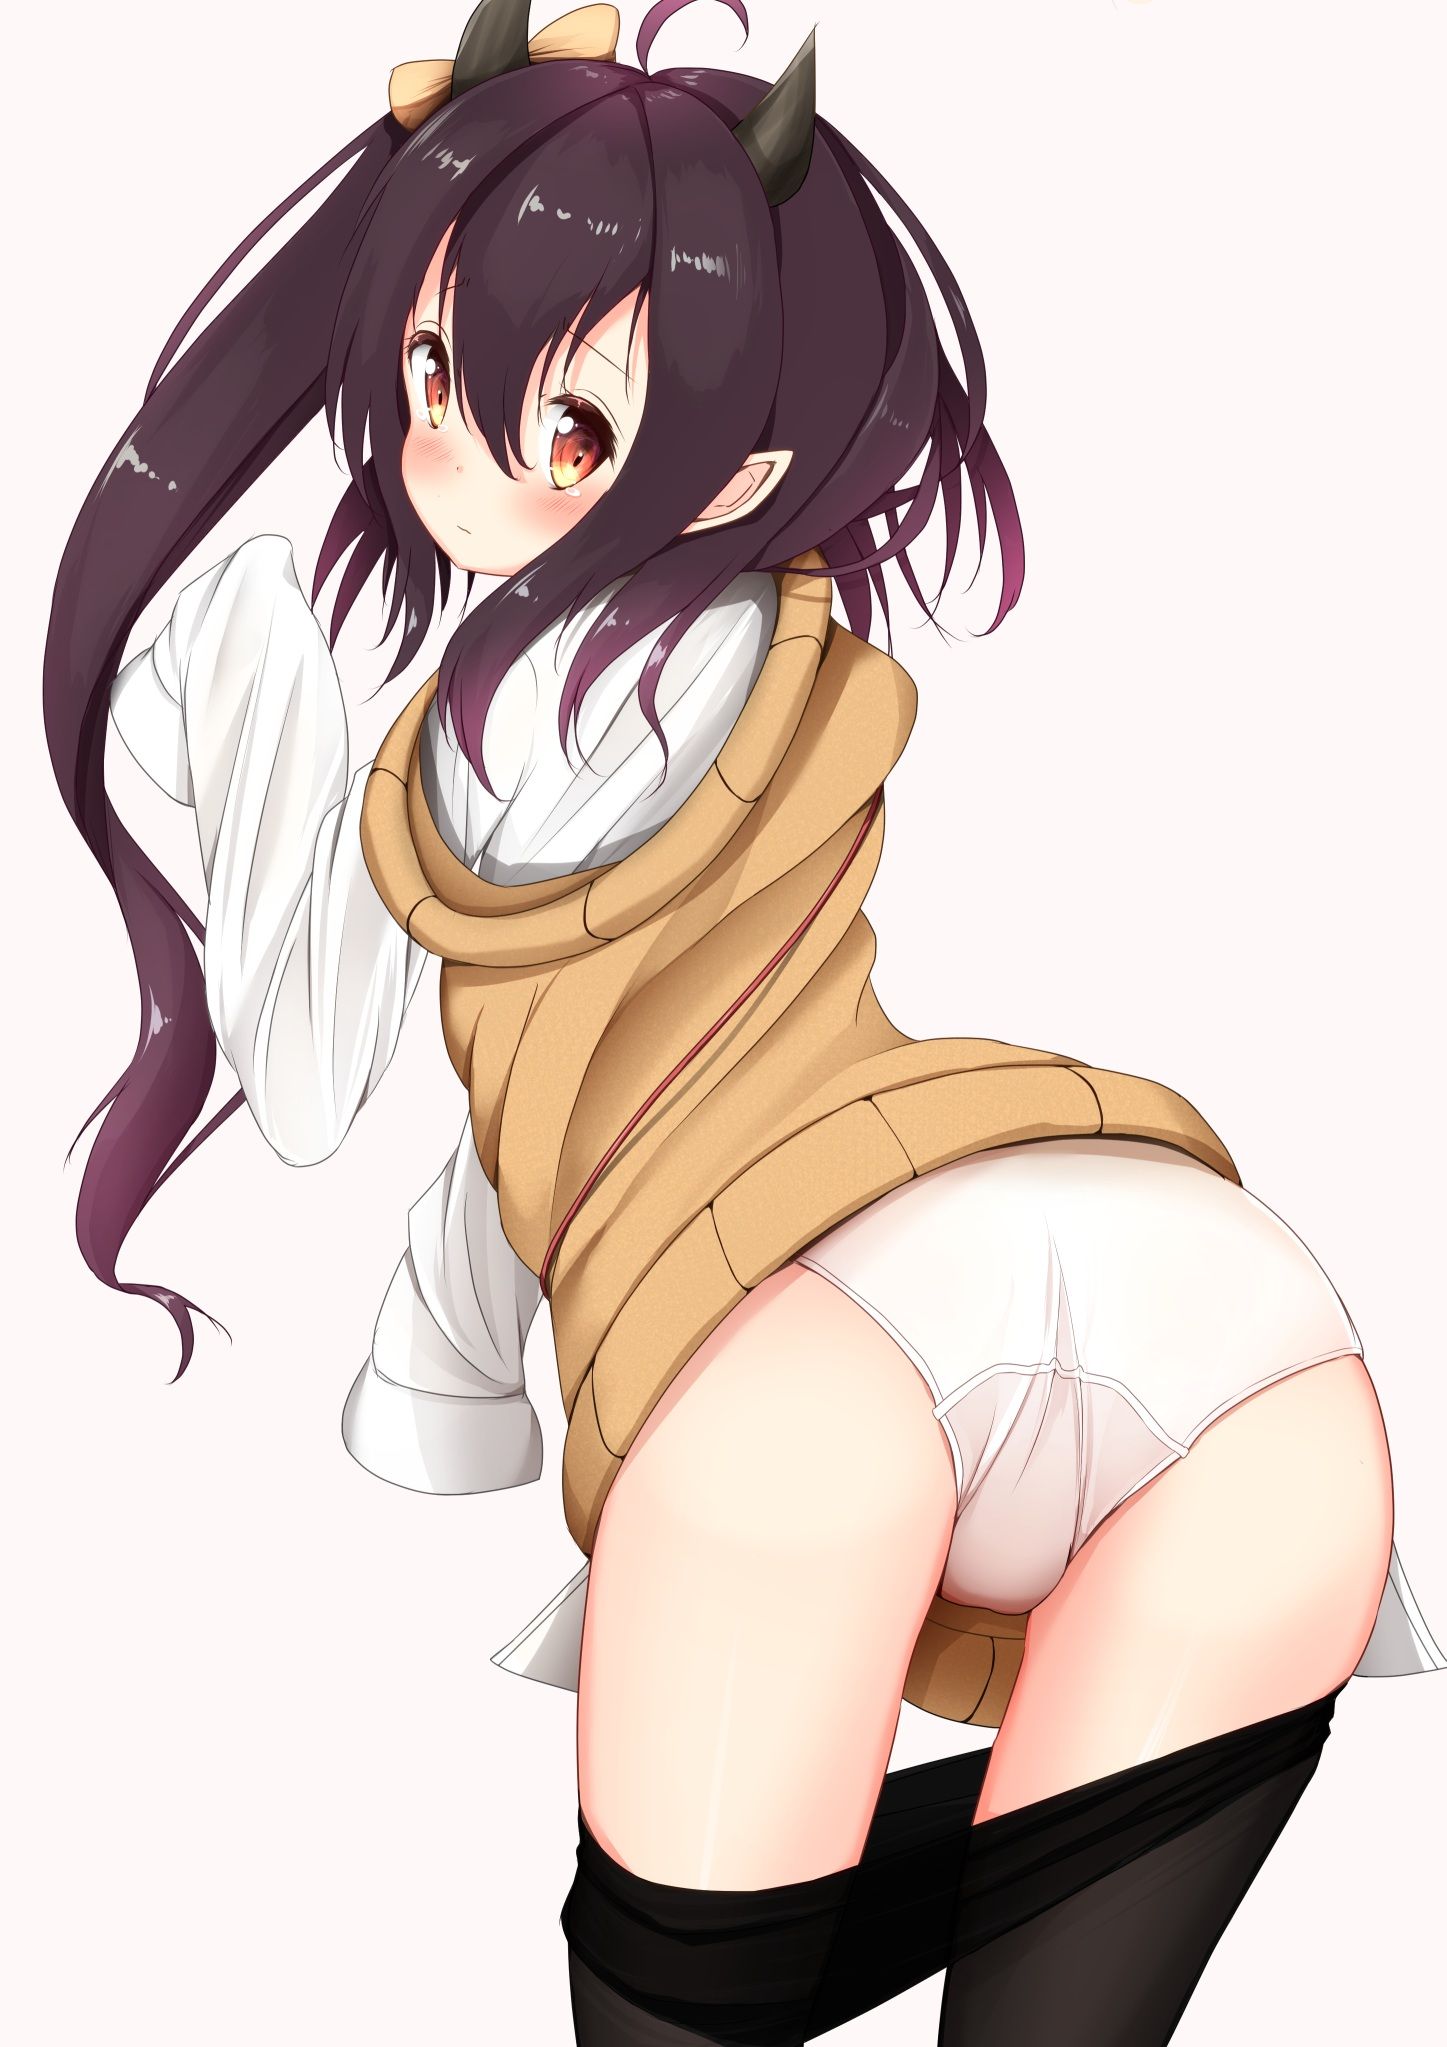 [Lori pants image] Loli pants secondary erotic image to become energetic on the weekend you want to spend looking at the cute pants of the secondary Loli girl 1